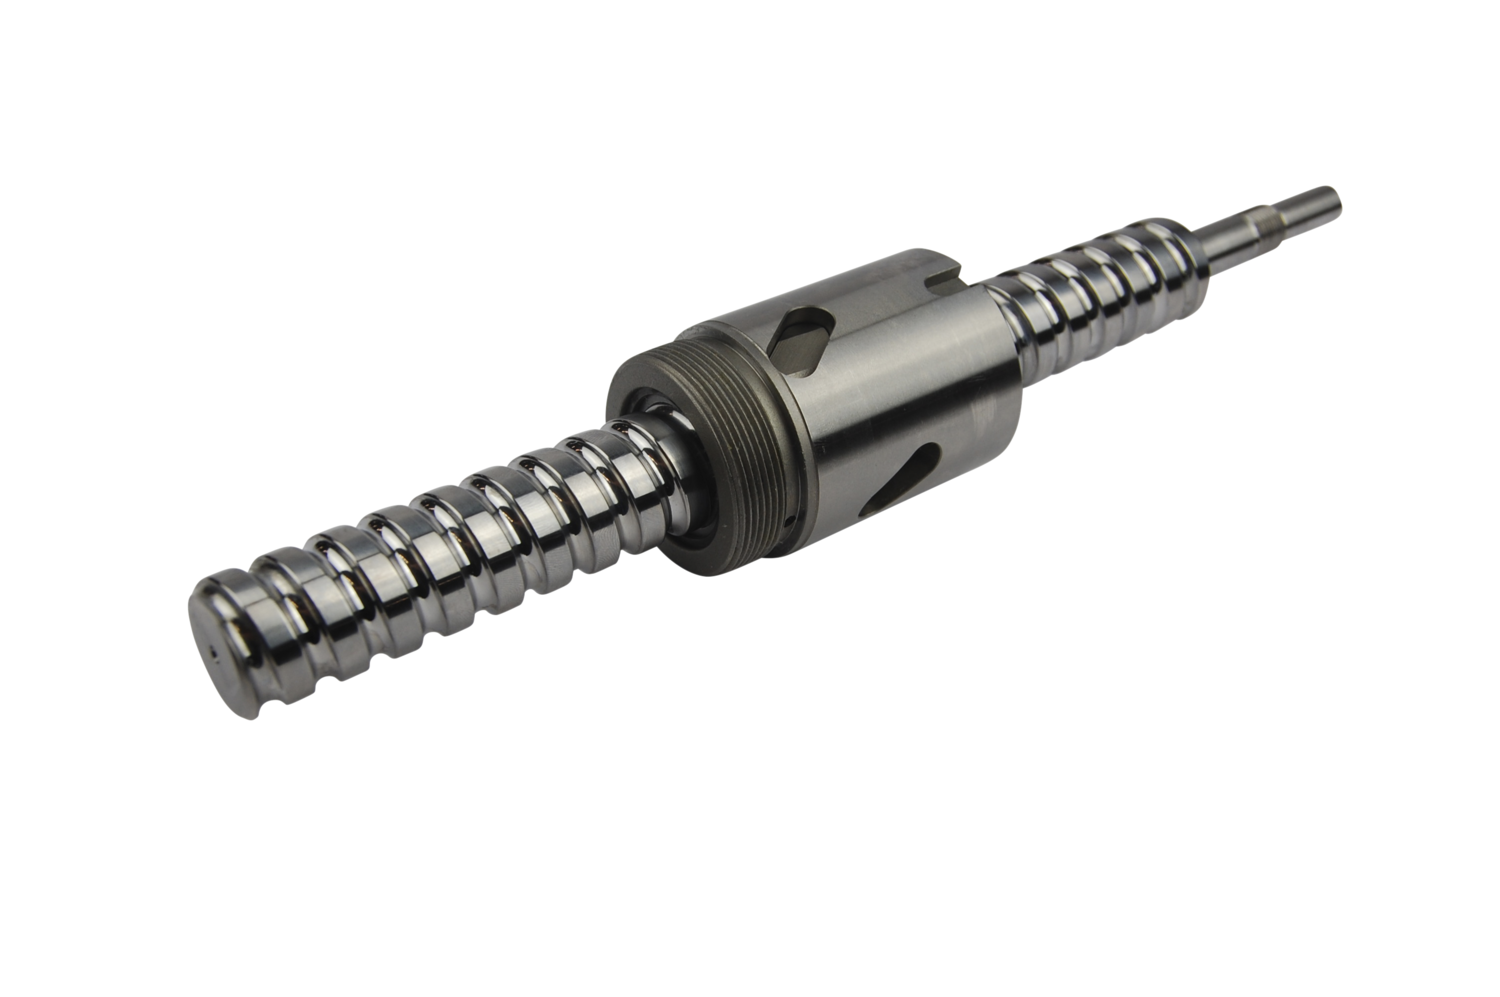 Ball screw spindle